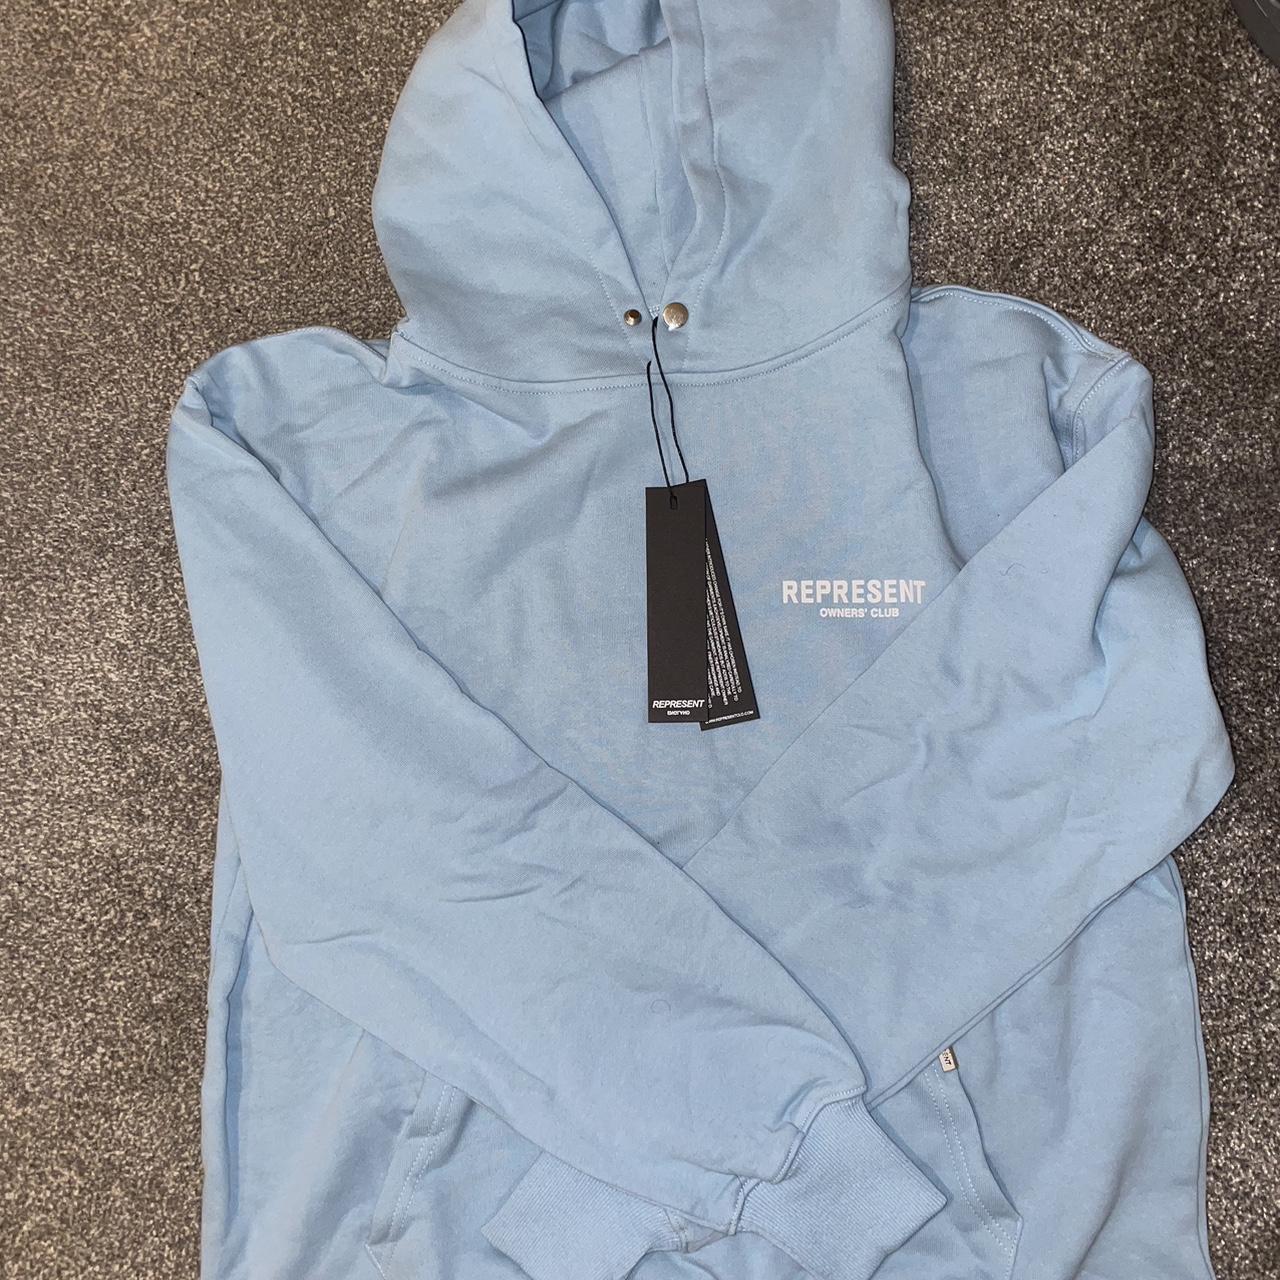 Represent Owners Club Baby Blue Hoodie💙 Size Small... - Depop